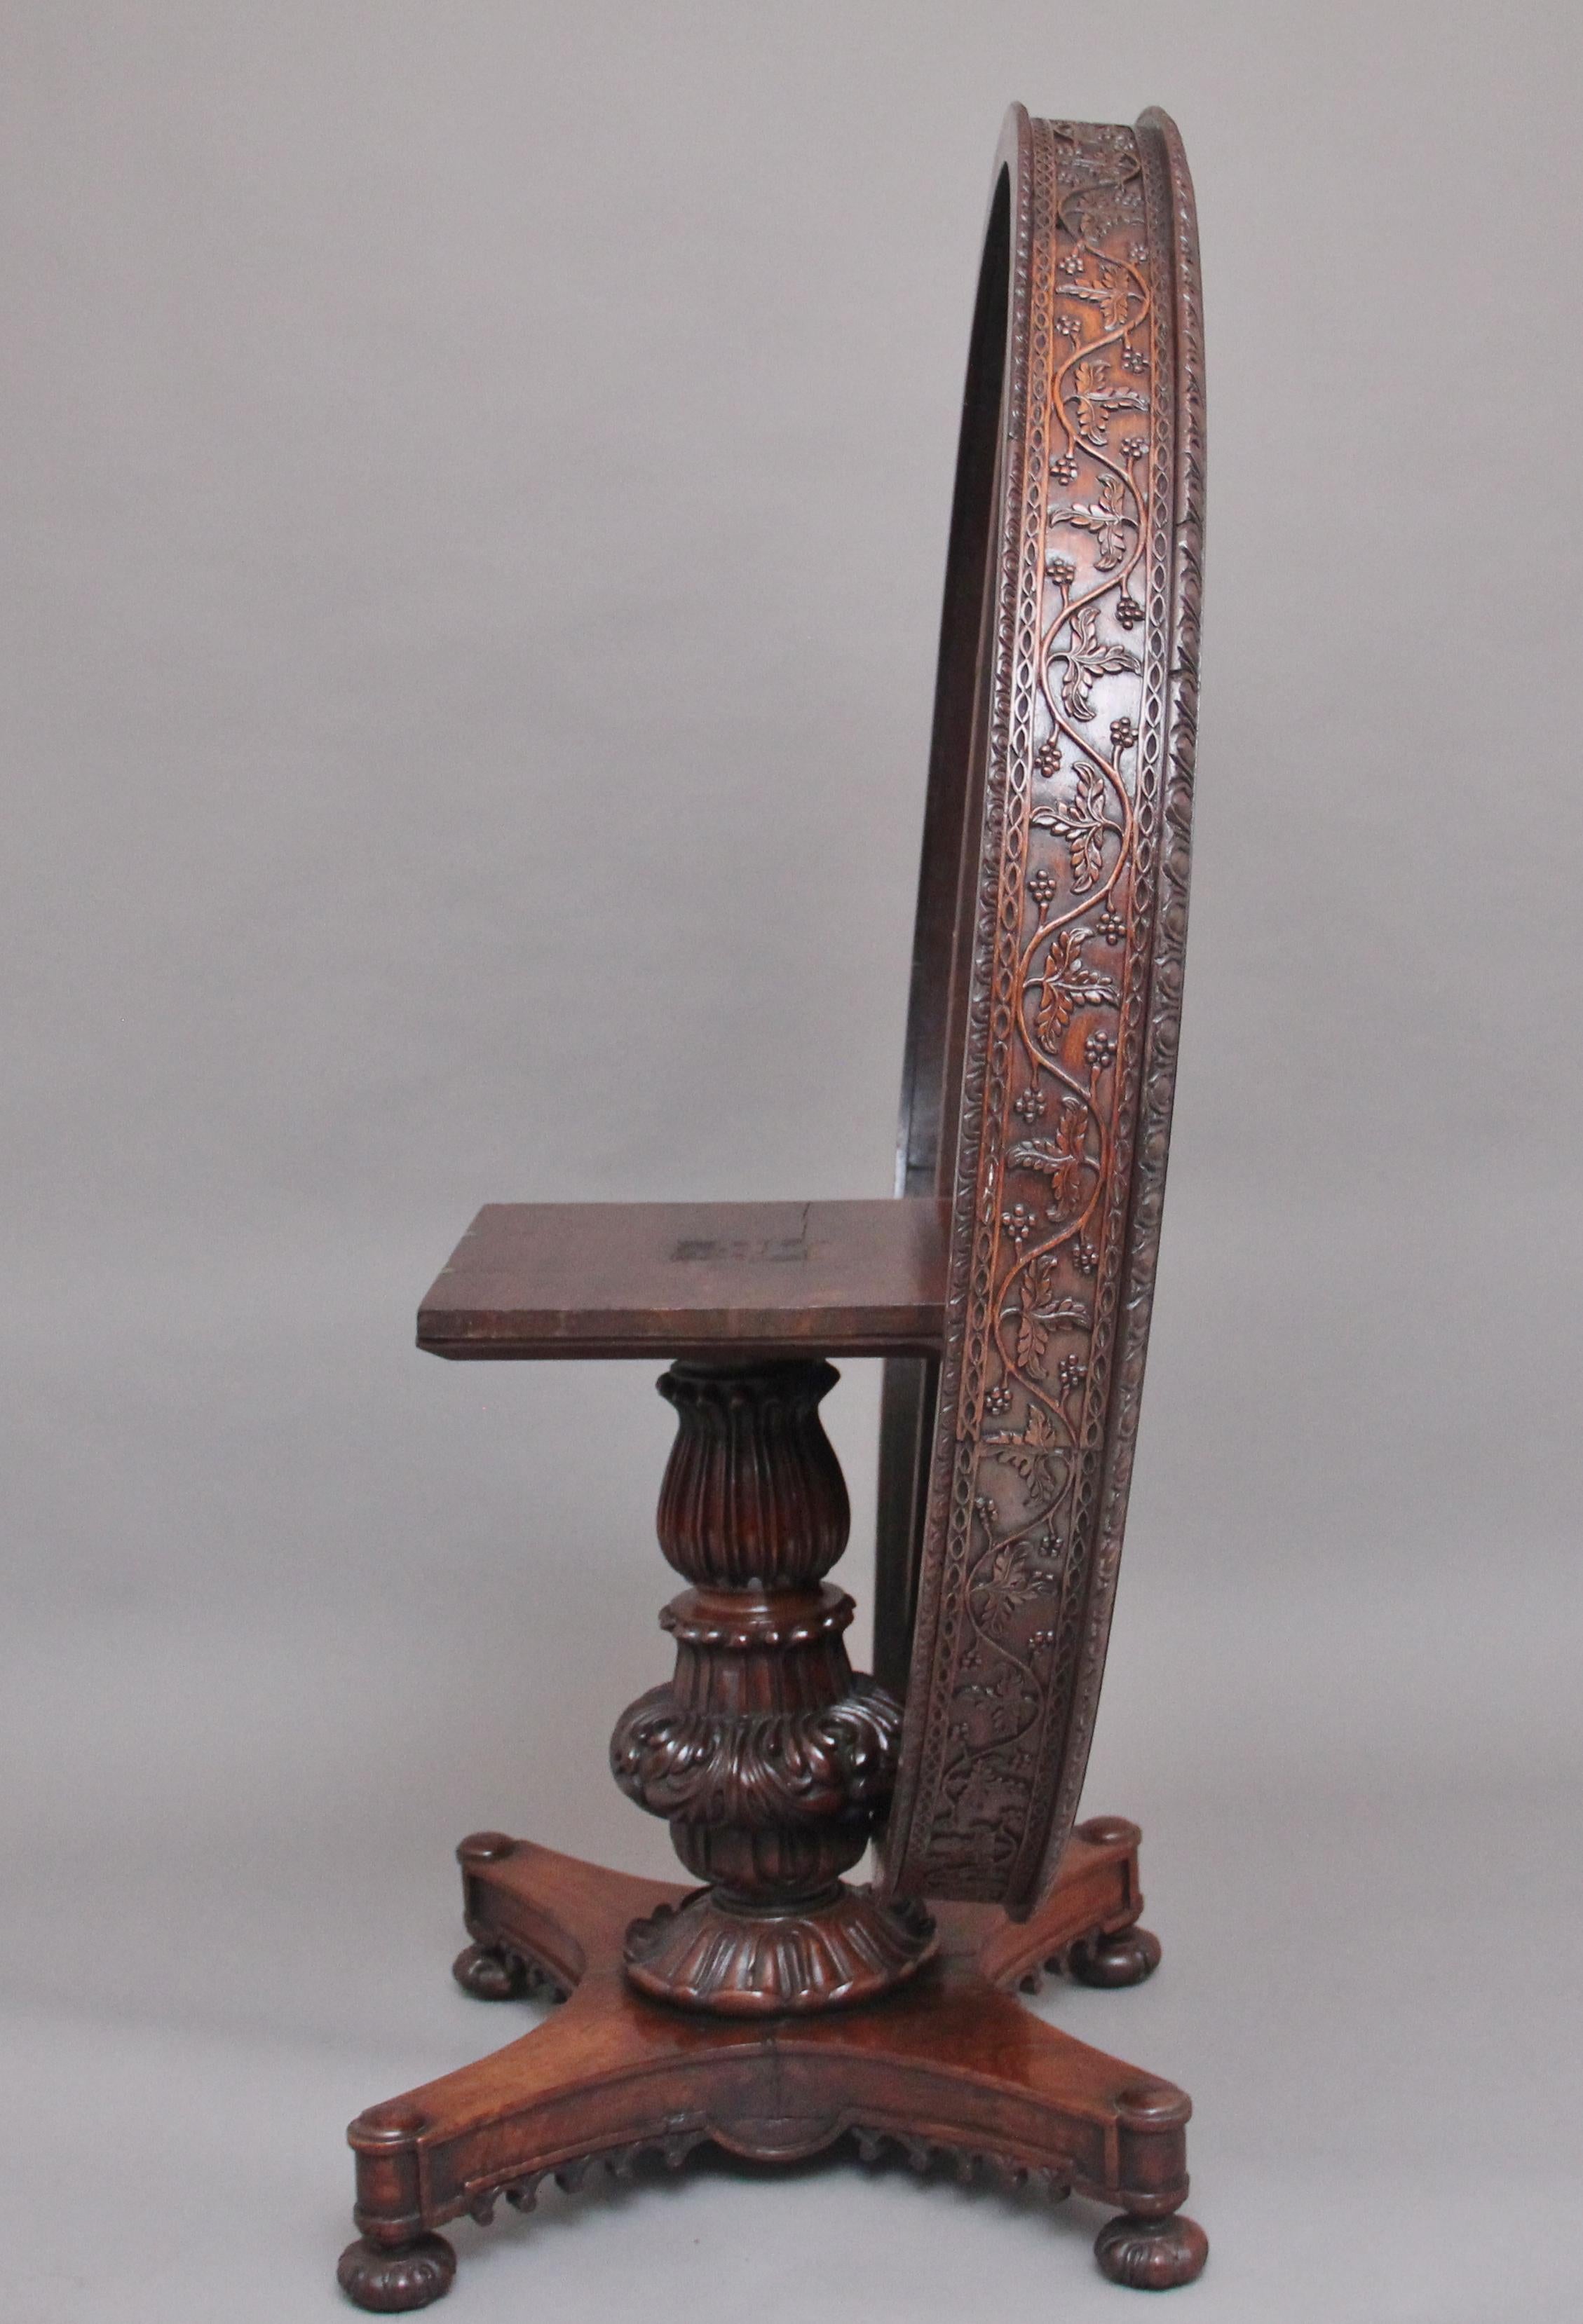 A rare mid 19th century Anglo Indian colonial carved teak tilt top centre table, having a lovely figured top with a deep carved frieze consisting of vines and berry’s, the top supported on a heavily carved tulip shaped column terminating on a shaped